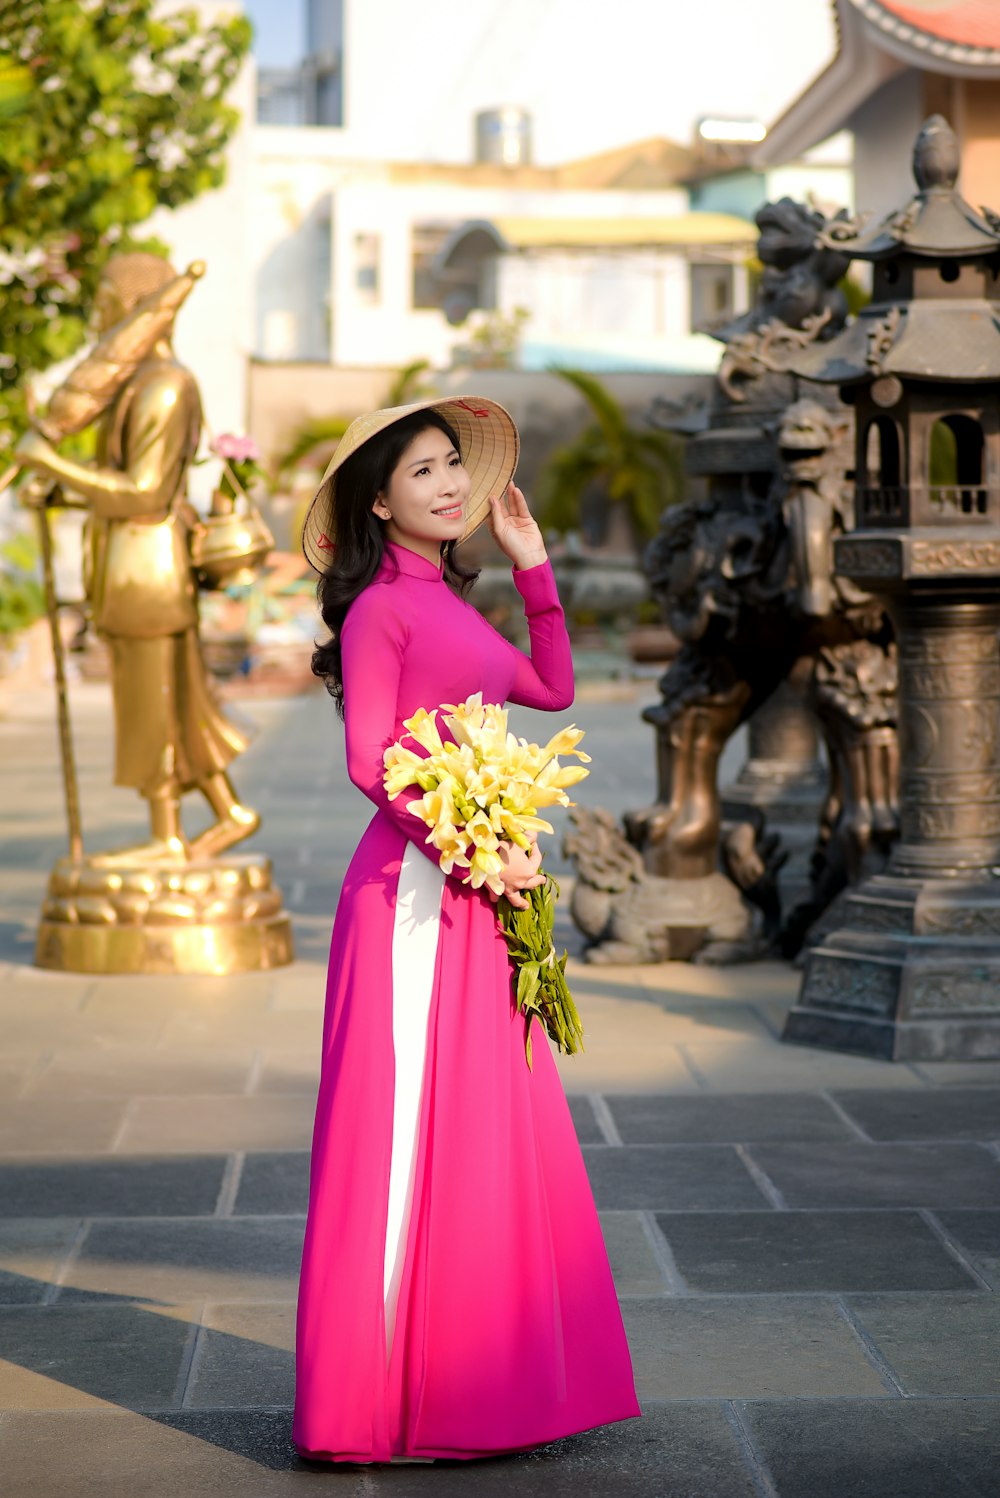 girl in pink dress holding bouquet of flowers